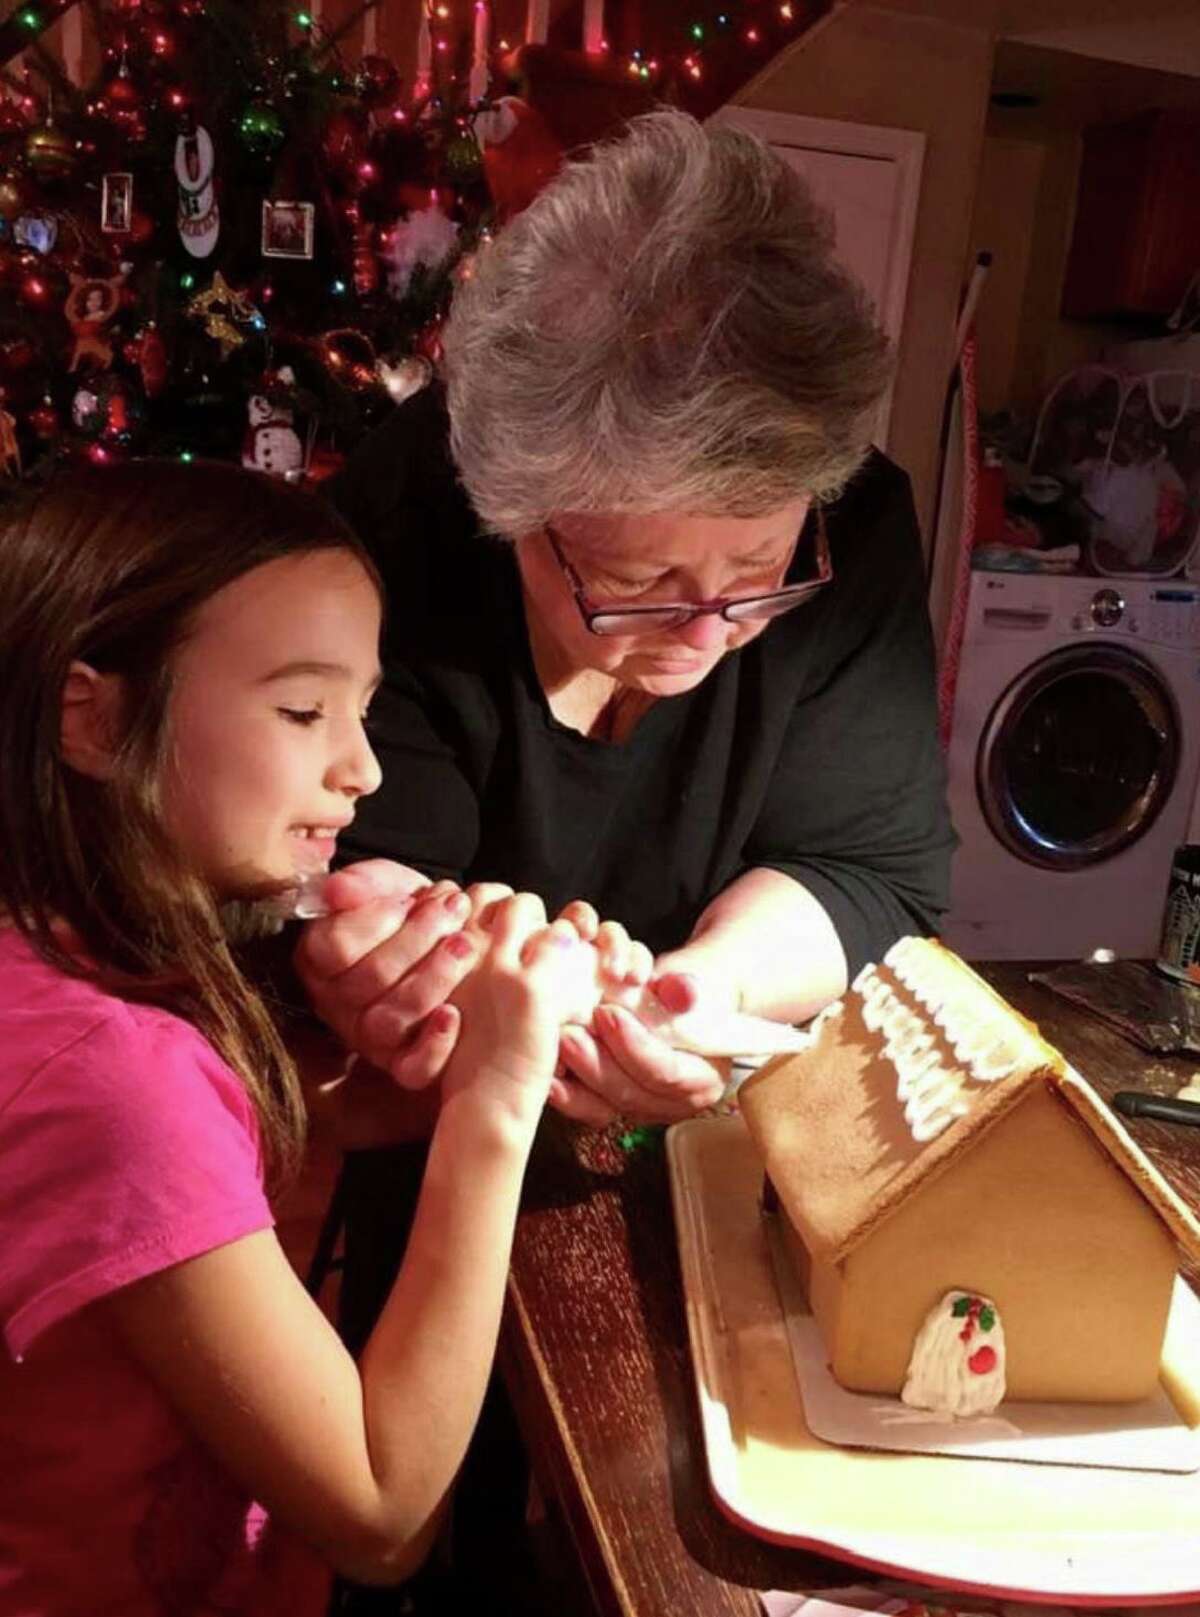 Jill Owens Zinzi teaches her granddaughter, Sofia, piping skills for icing a gingerbread roof. Sofia was 7 at the time. Zinzi, who started the Kent Gingerbread Festival, says Sofia is a third-generation gingerbread fan, along with her three grandsons. The Kent Gingerbread Festival, one of the largest in Connecticut, is in its 9th year and runs through December.